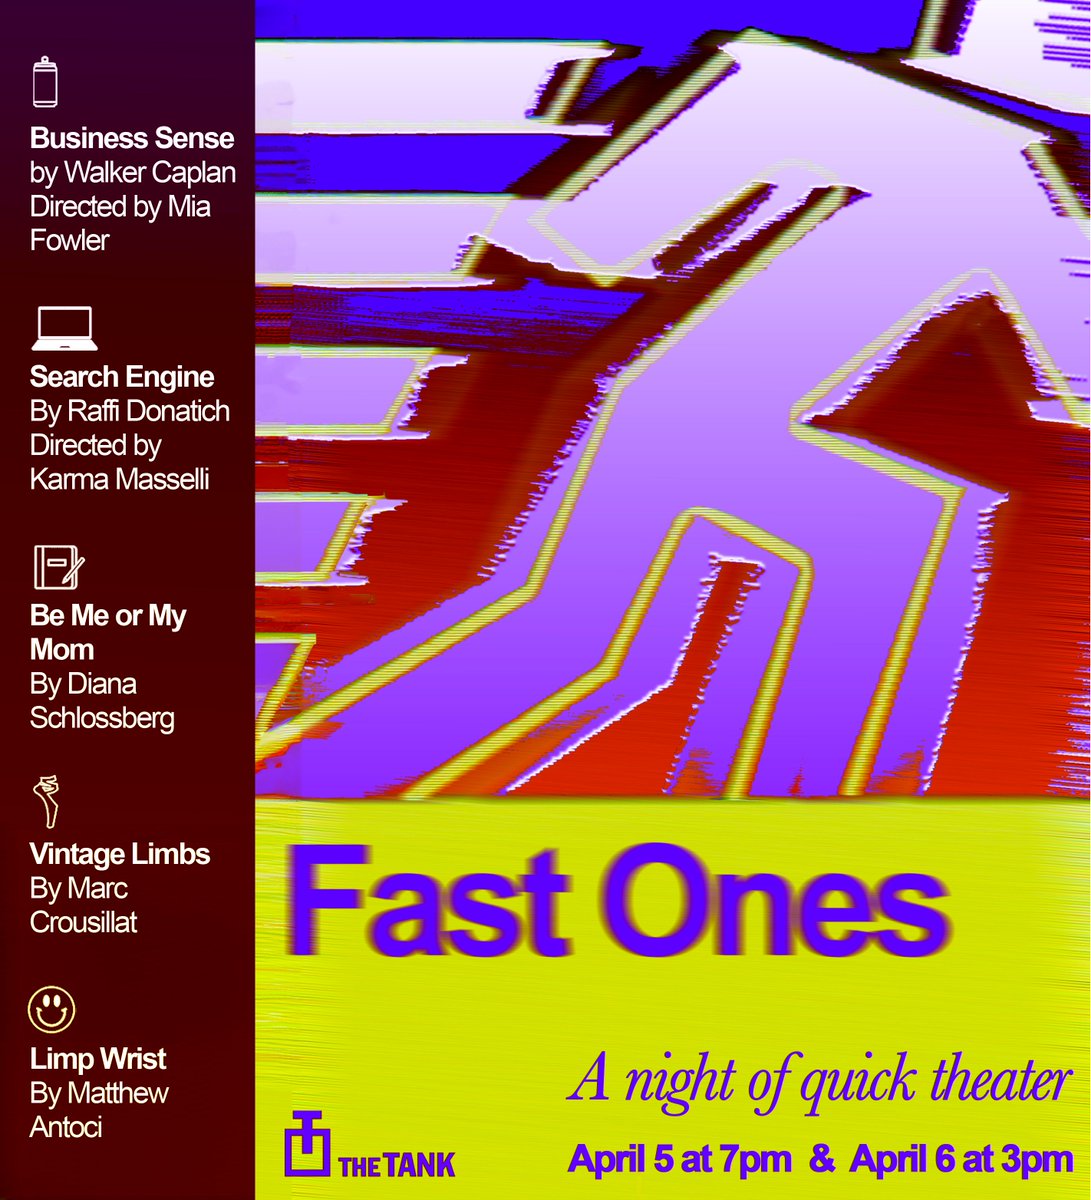 FAST ONES 🍺 A NIGHT OF QUICK THEATER 💻 APRIL 5-6 🩰 AT @TheTankNYC 📕 SIMPLE AS THAT 😆